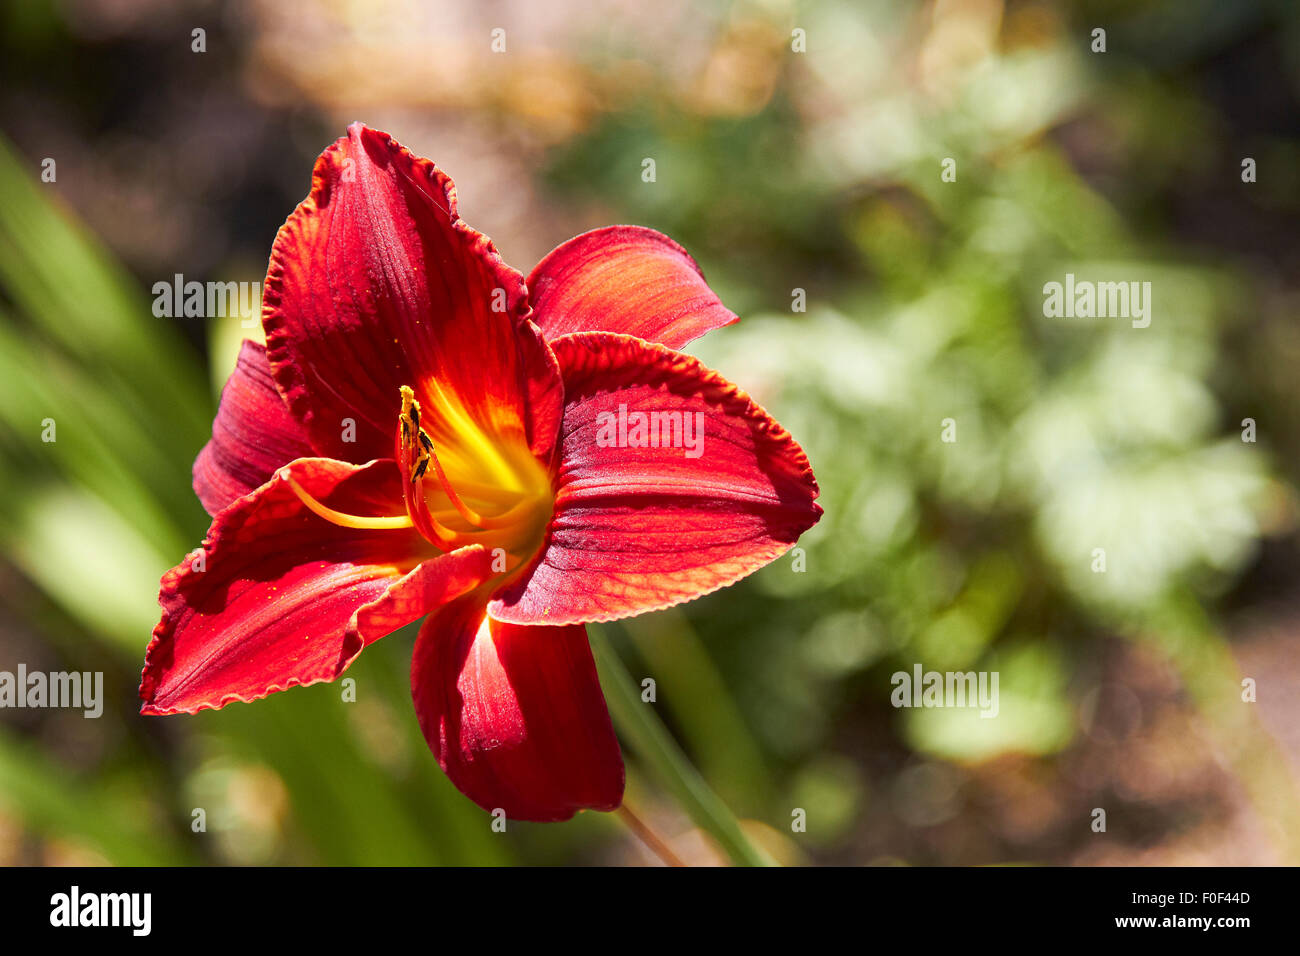 Lily flower, Nature, Garden, Red lily, Wildlife, Outdoors Stock Photo